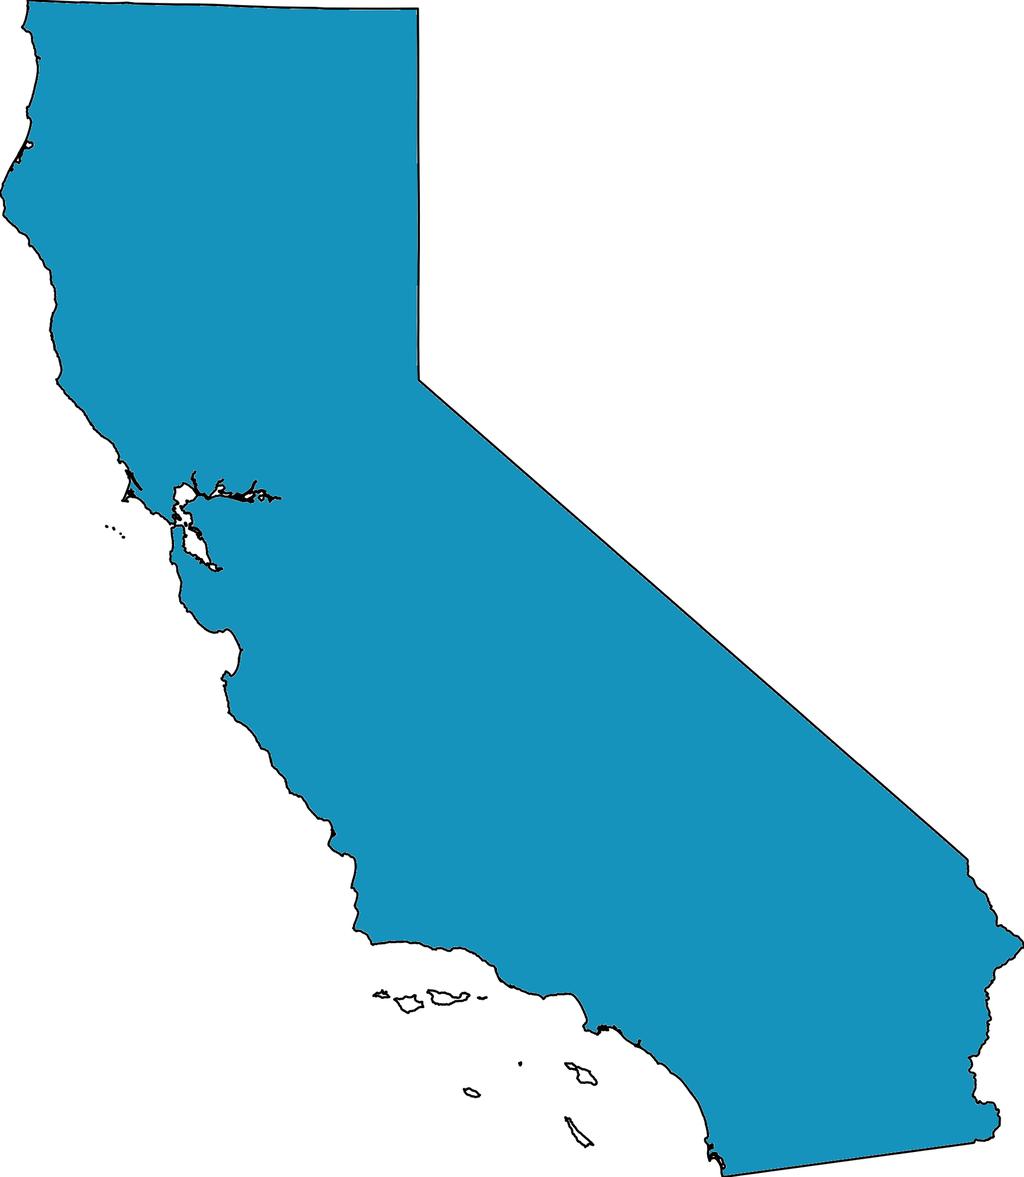 The California Whole Person Care Pilot Program: County Partnerships to Improve the Health of Medi-Cal Beneficiaries Prepared by Lucy Pagel, Tanya Schwartz and Jennifer Ryan with support from The